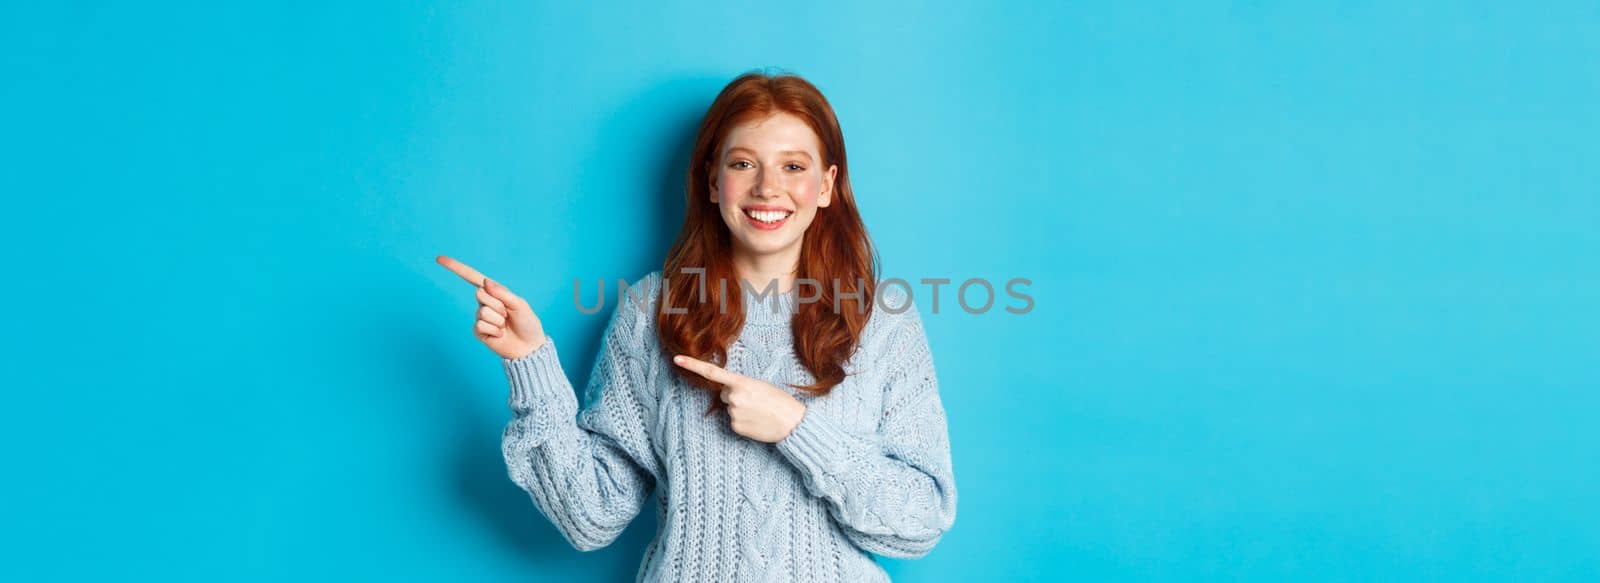 Winter holidays and people concept. Pretty teenage girl with red hair, pointing fingers right at logo copy space, smiling at camera, blue background.